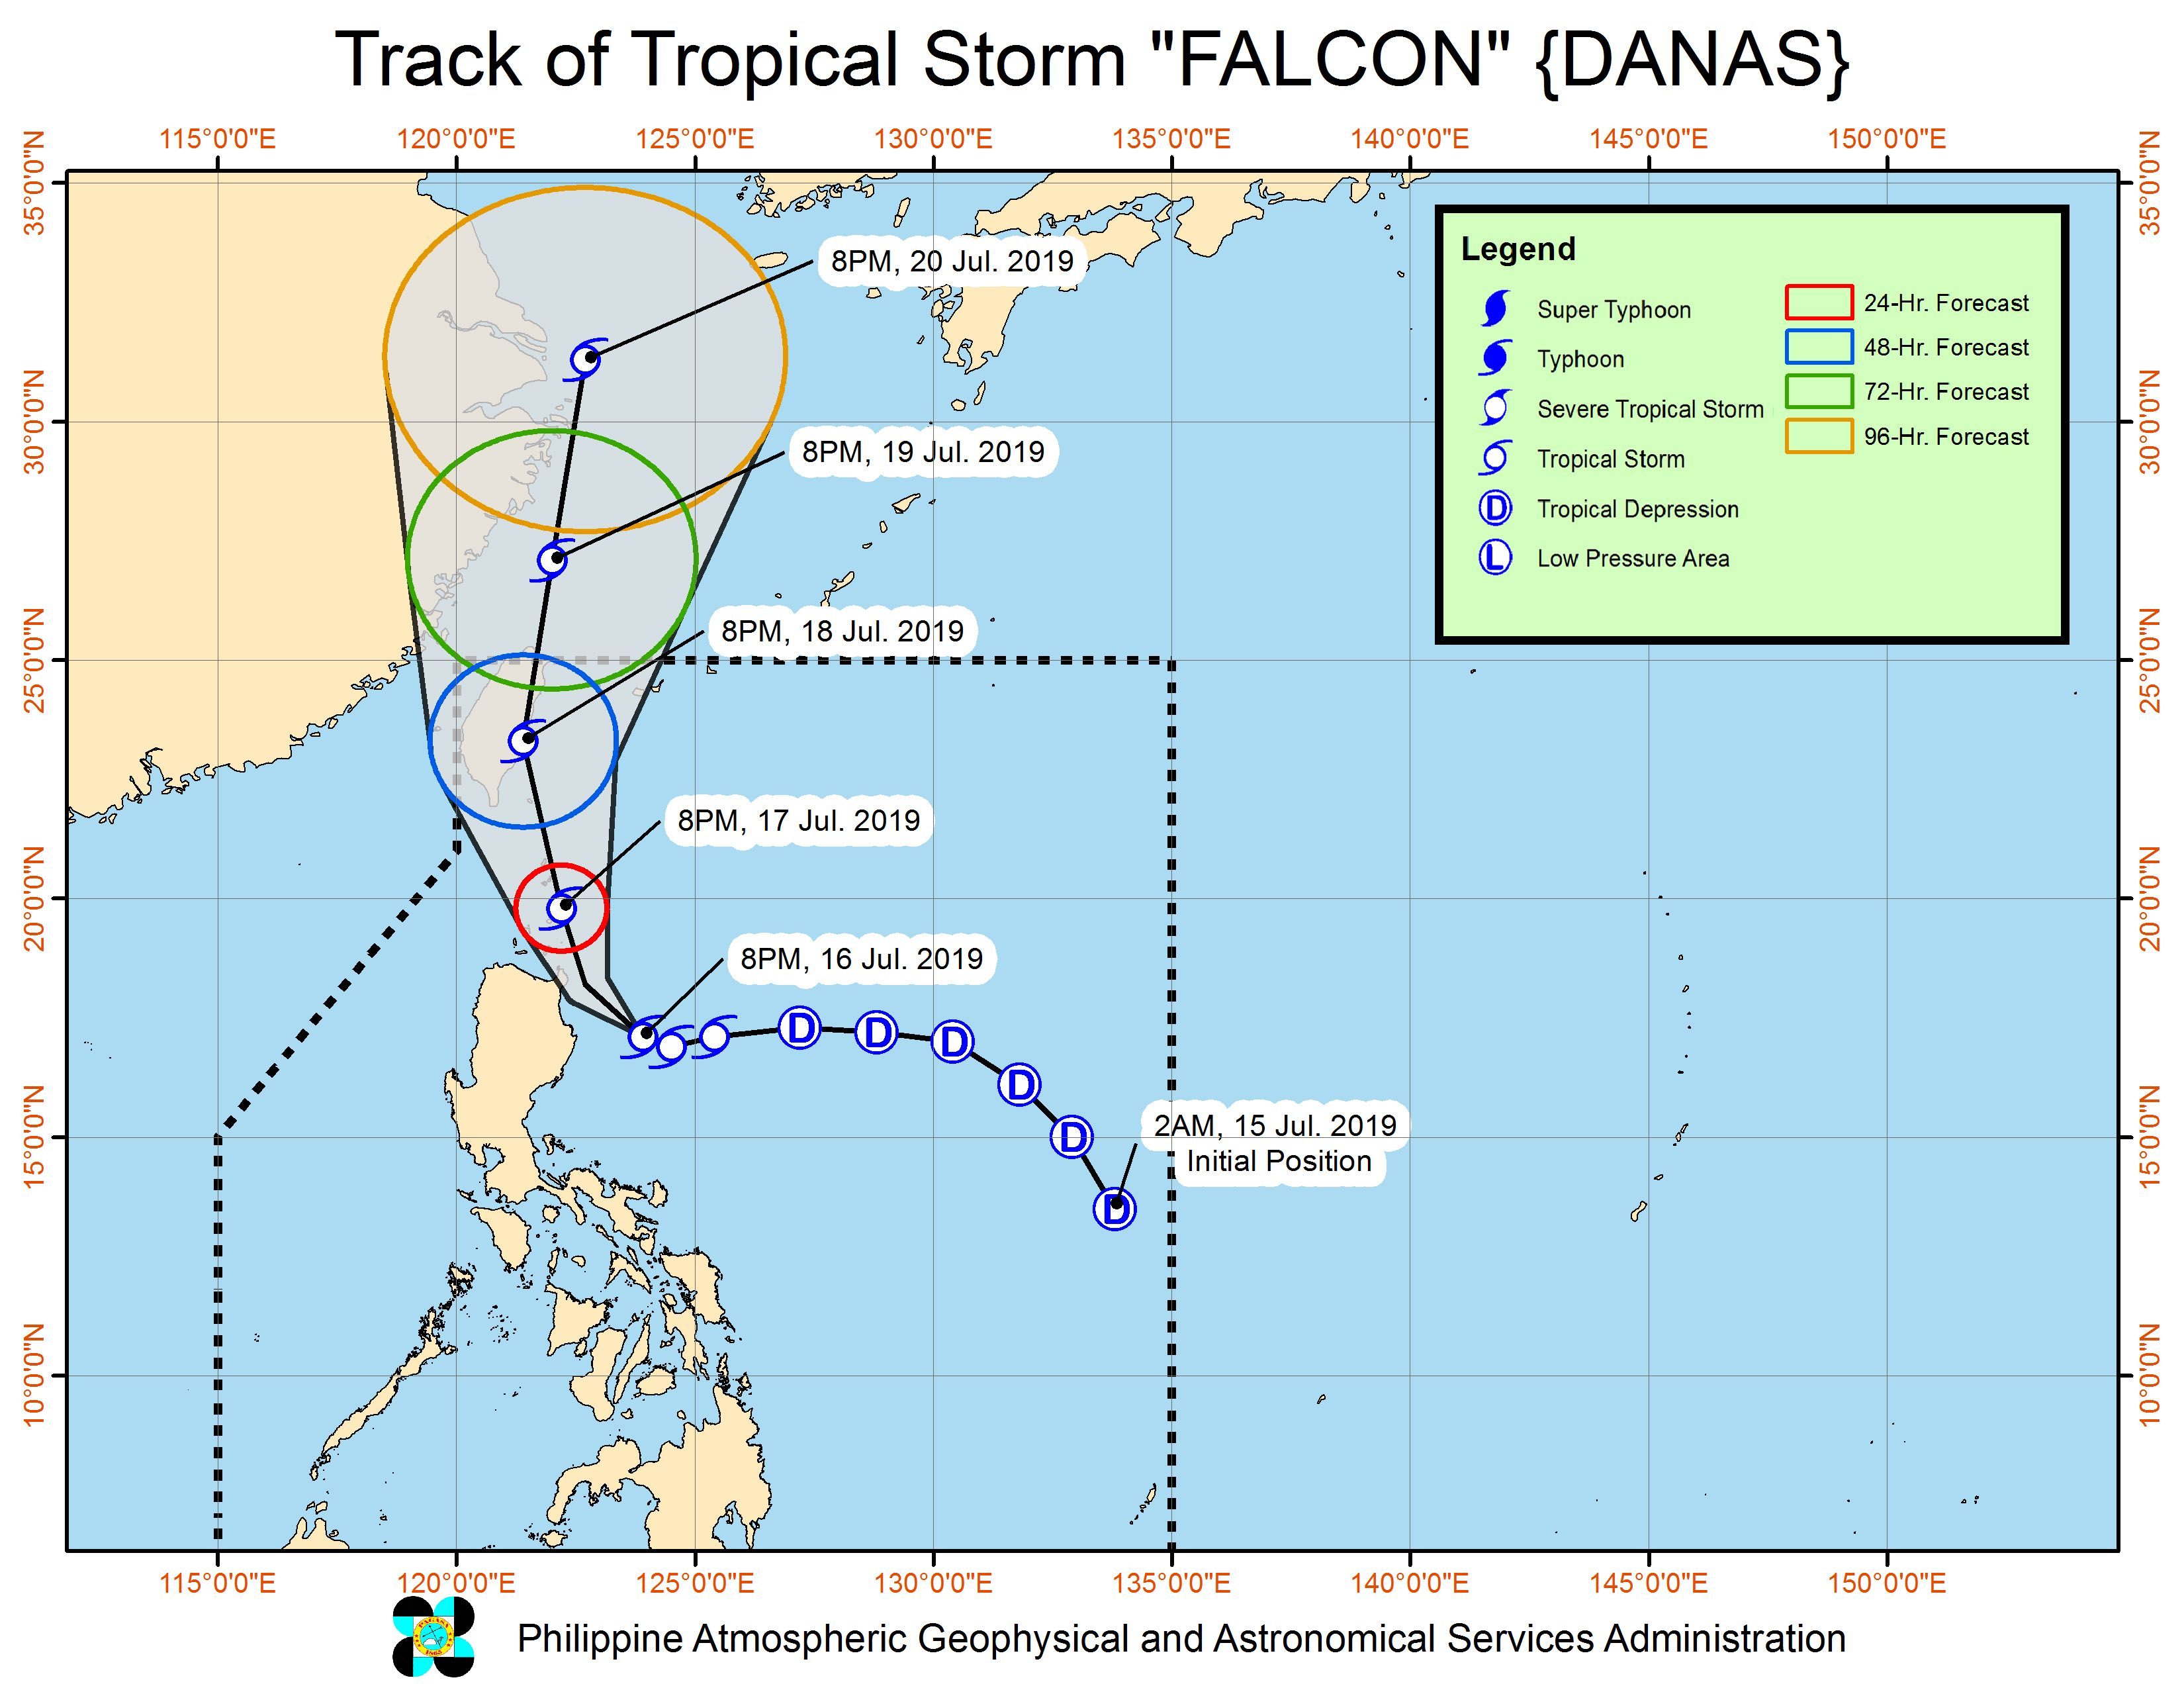 Forecast track of Tropical Storm Falcon (Danas) as of July 16, 2019, 11 pm. Image from PAGASA 